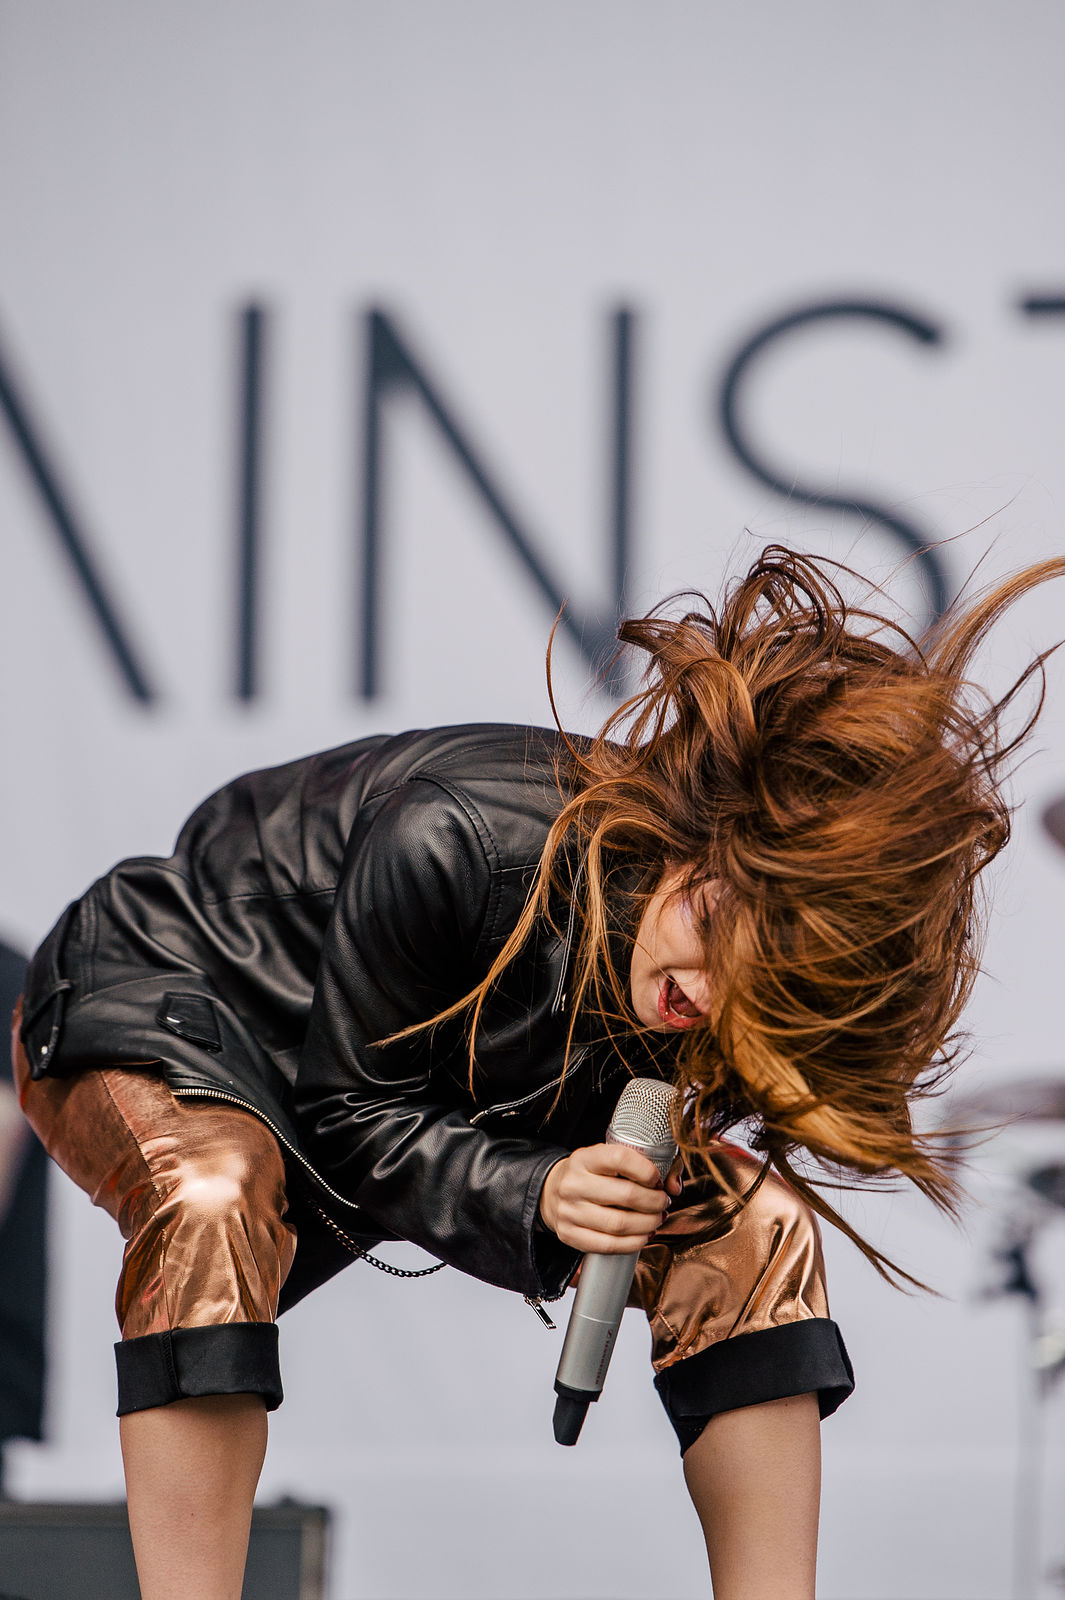 Leeds Festival Gallery Against The Current Against The Current